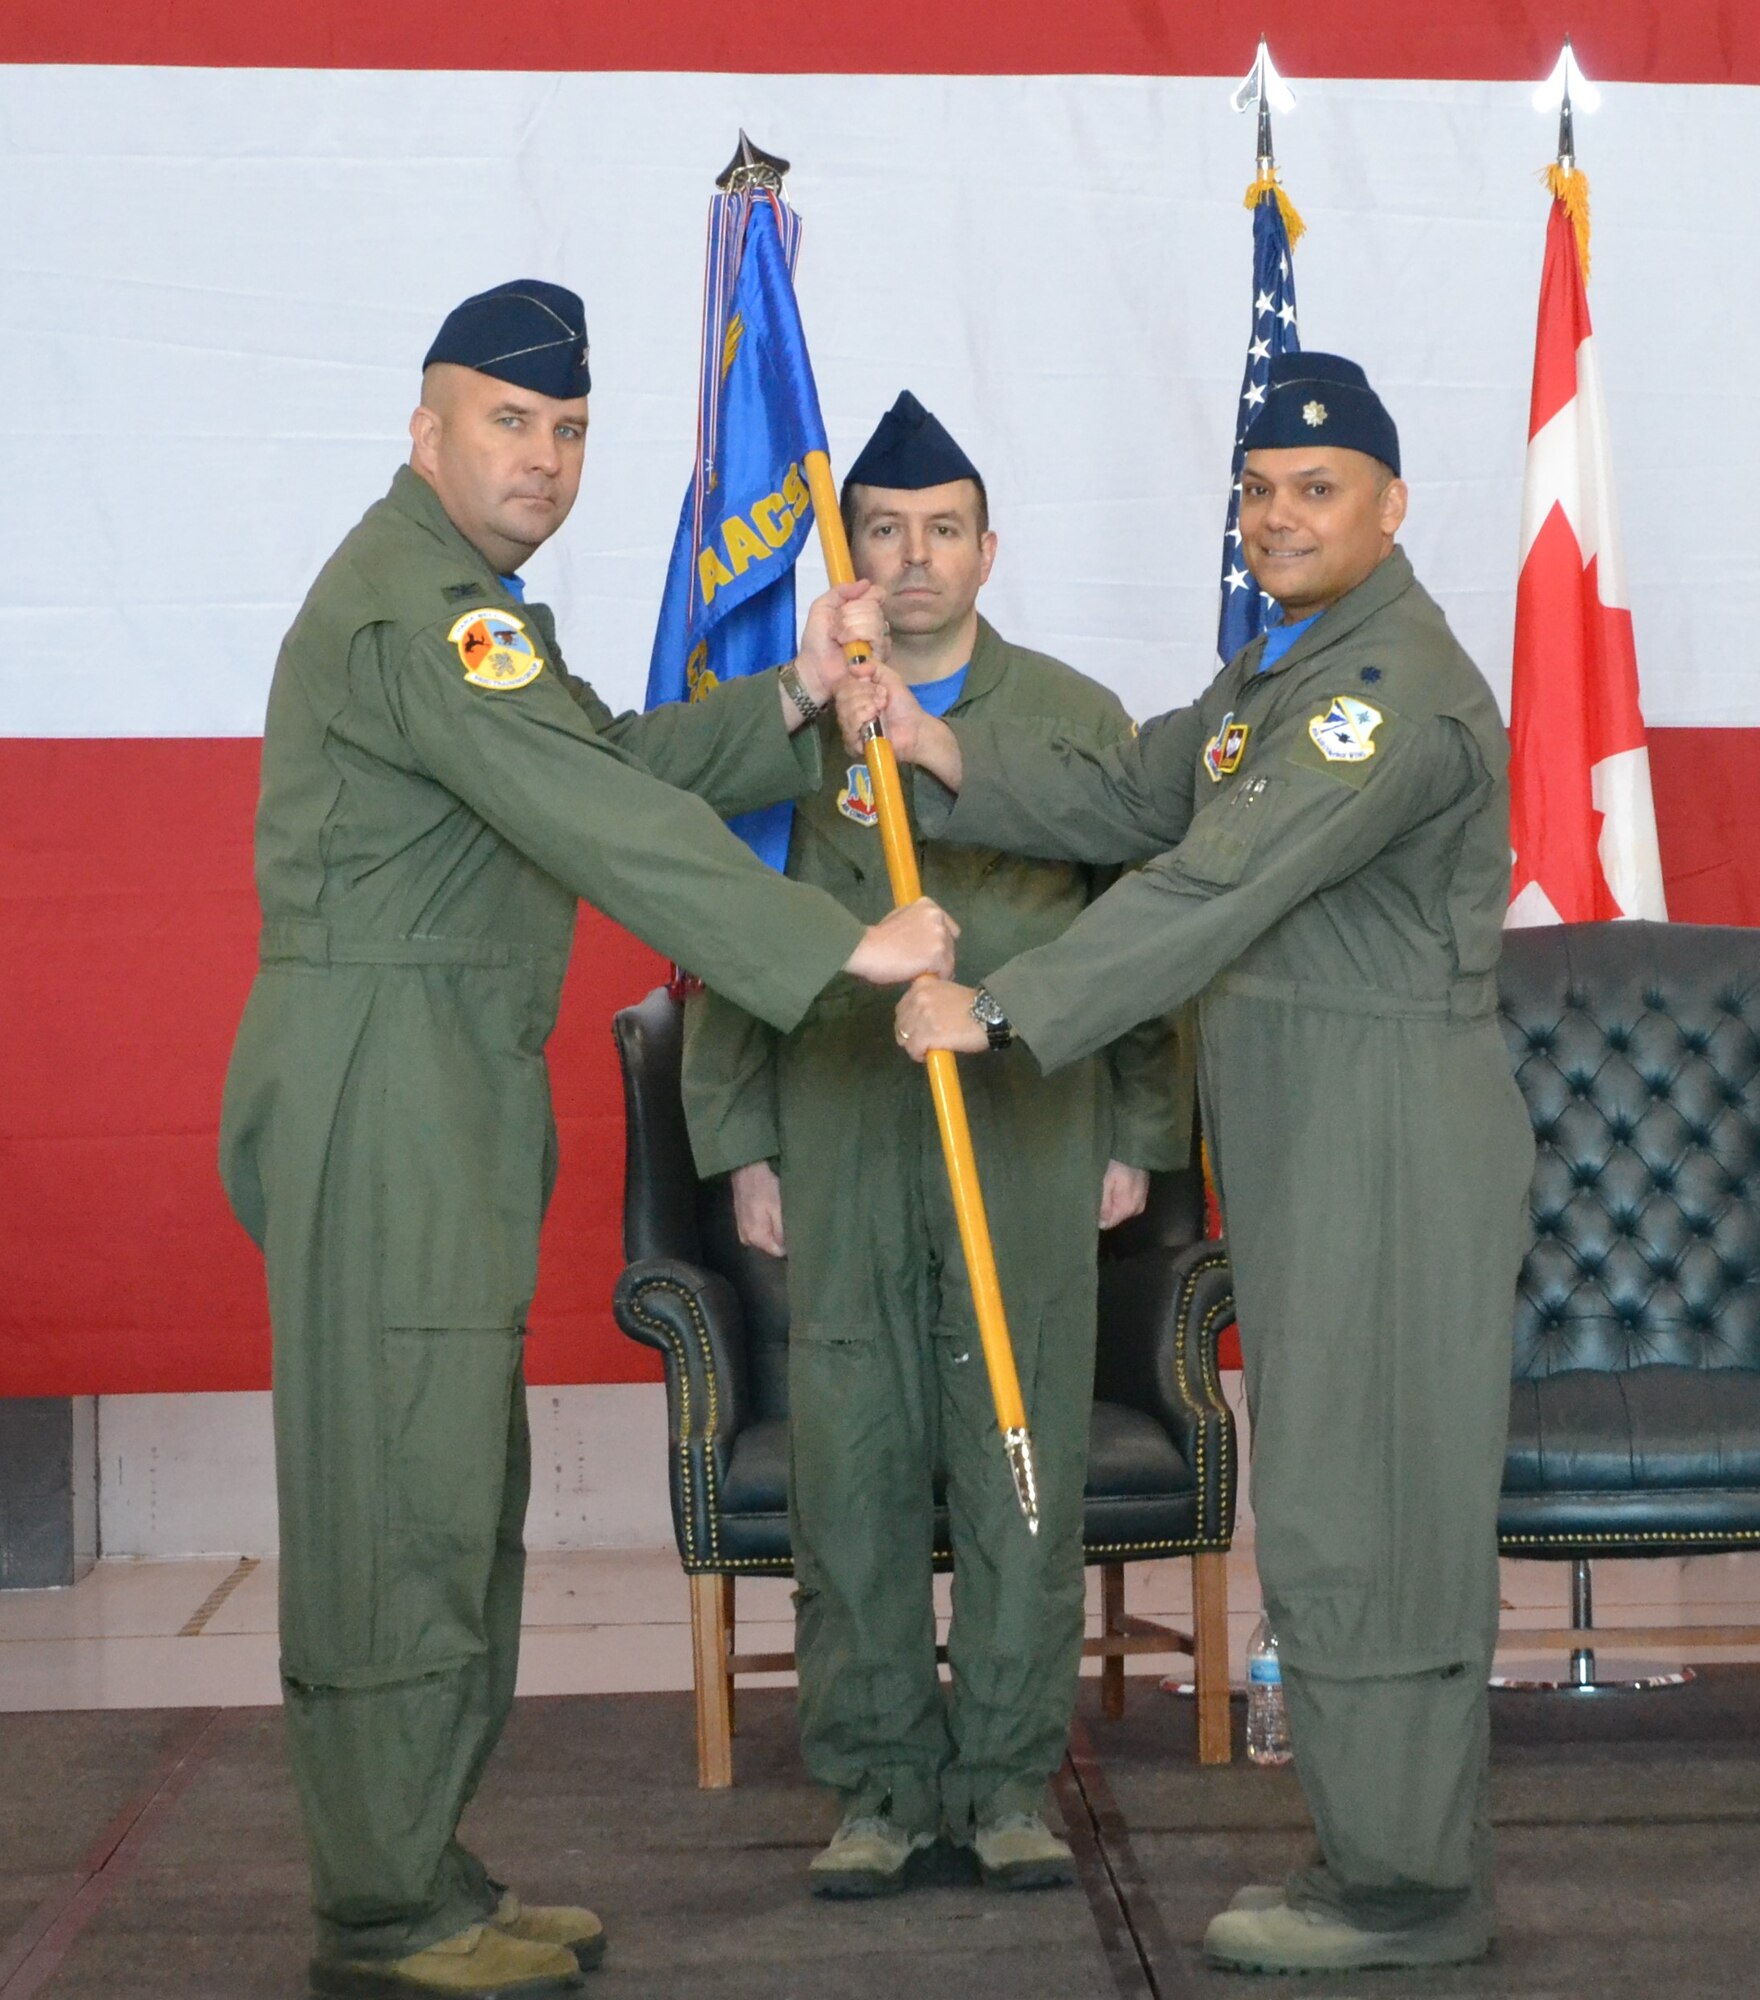 Lt. Col. Marty Slovinsky accepts command of the 966th Airborne Air Control Squadron in an official ceremony on April 12.  The change of command was presided over by Col. Stephen Carocci, commander of the 552nd Training Group while Senior Master Sgt. Richard Babcock, senior enlisted manager of the 966th AACS, served as the guidon bearer. (U.S. Air Force photo/2nd Lt. Ashlyn K. Paulson).